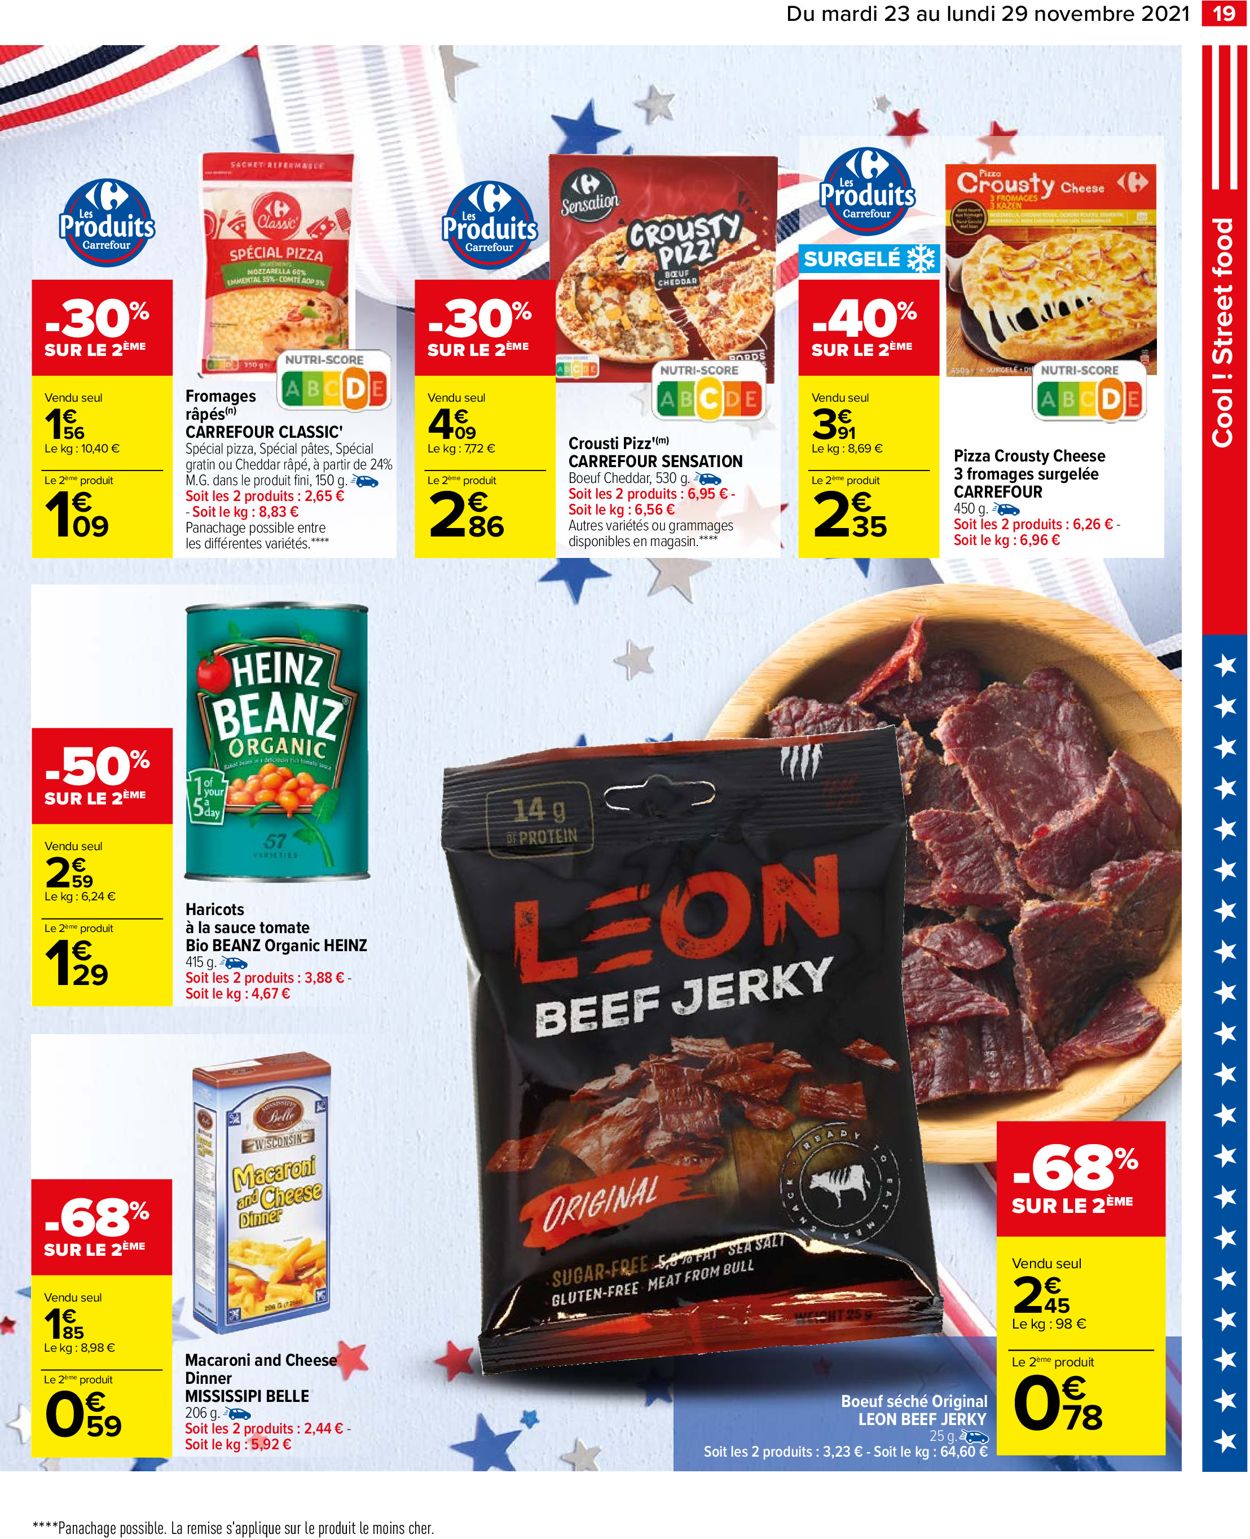 Carrefour BLACK WEEK 2021 Catalogue - 23.11-29.11.2021 (Page 19)